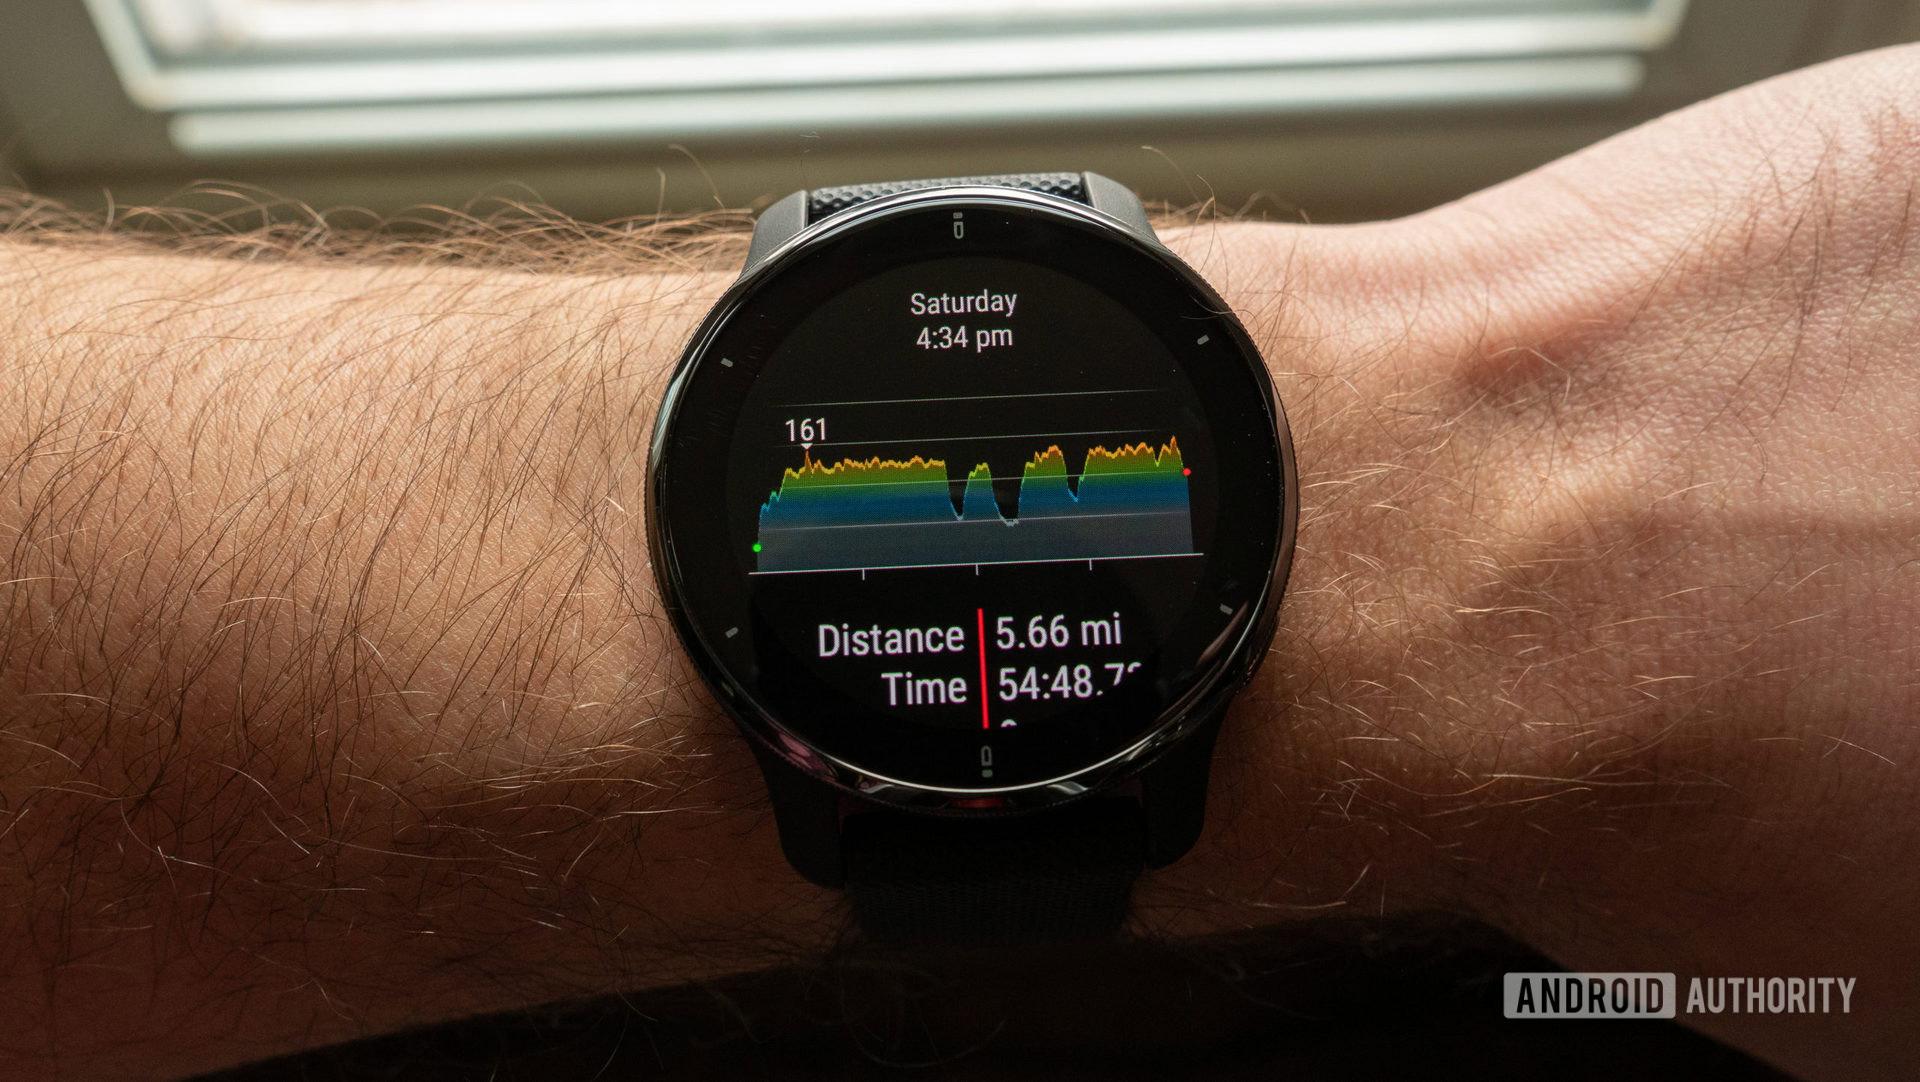 The most common Garmin problems and how to fix them